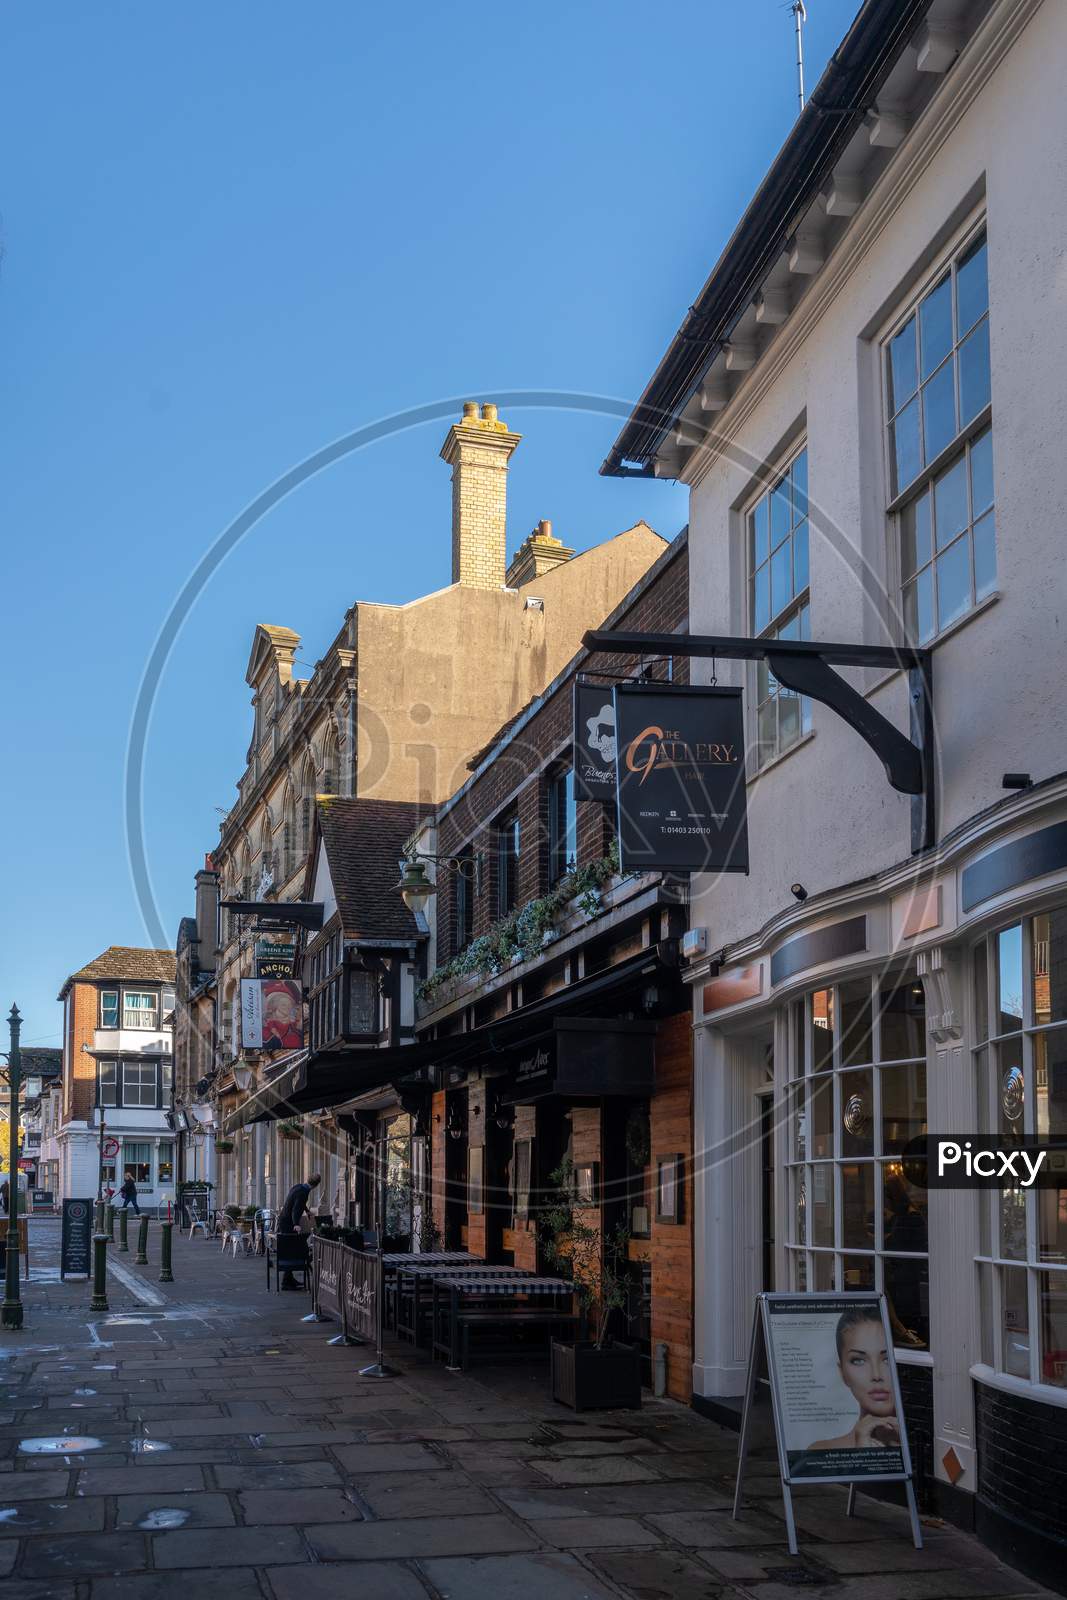 Horsham West Sussex/Uk - November 30 : View Of The Town Centre In Horsham West Sussex On  November 30, 2018. Three Unidentified People